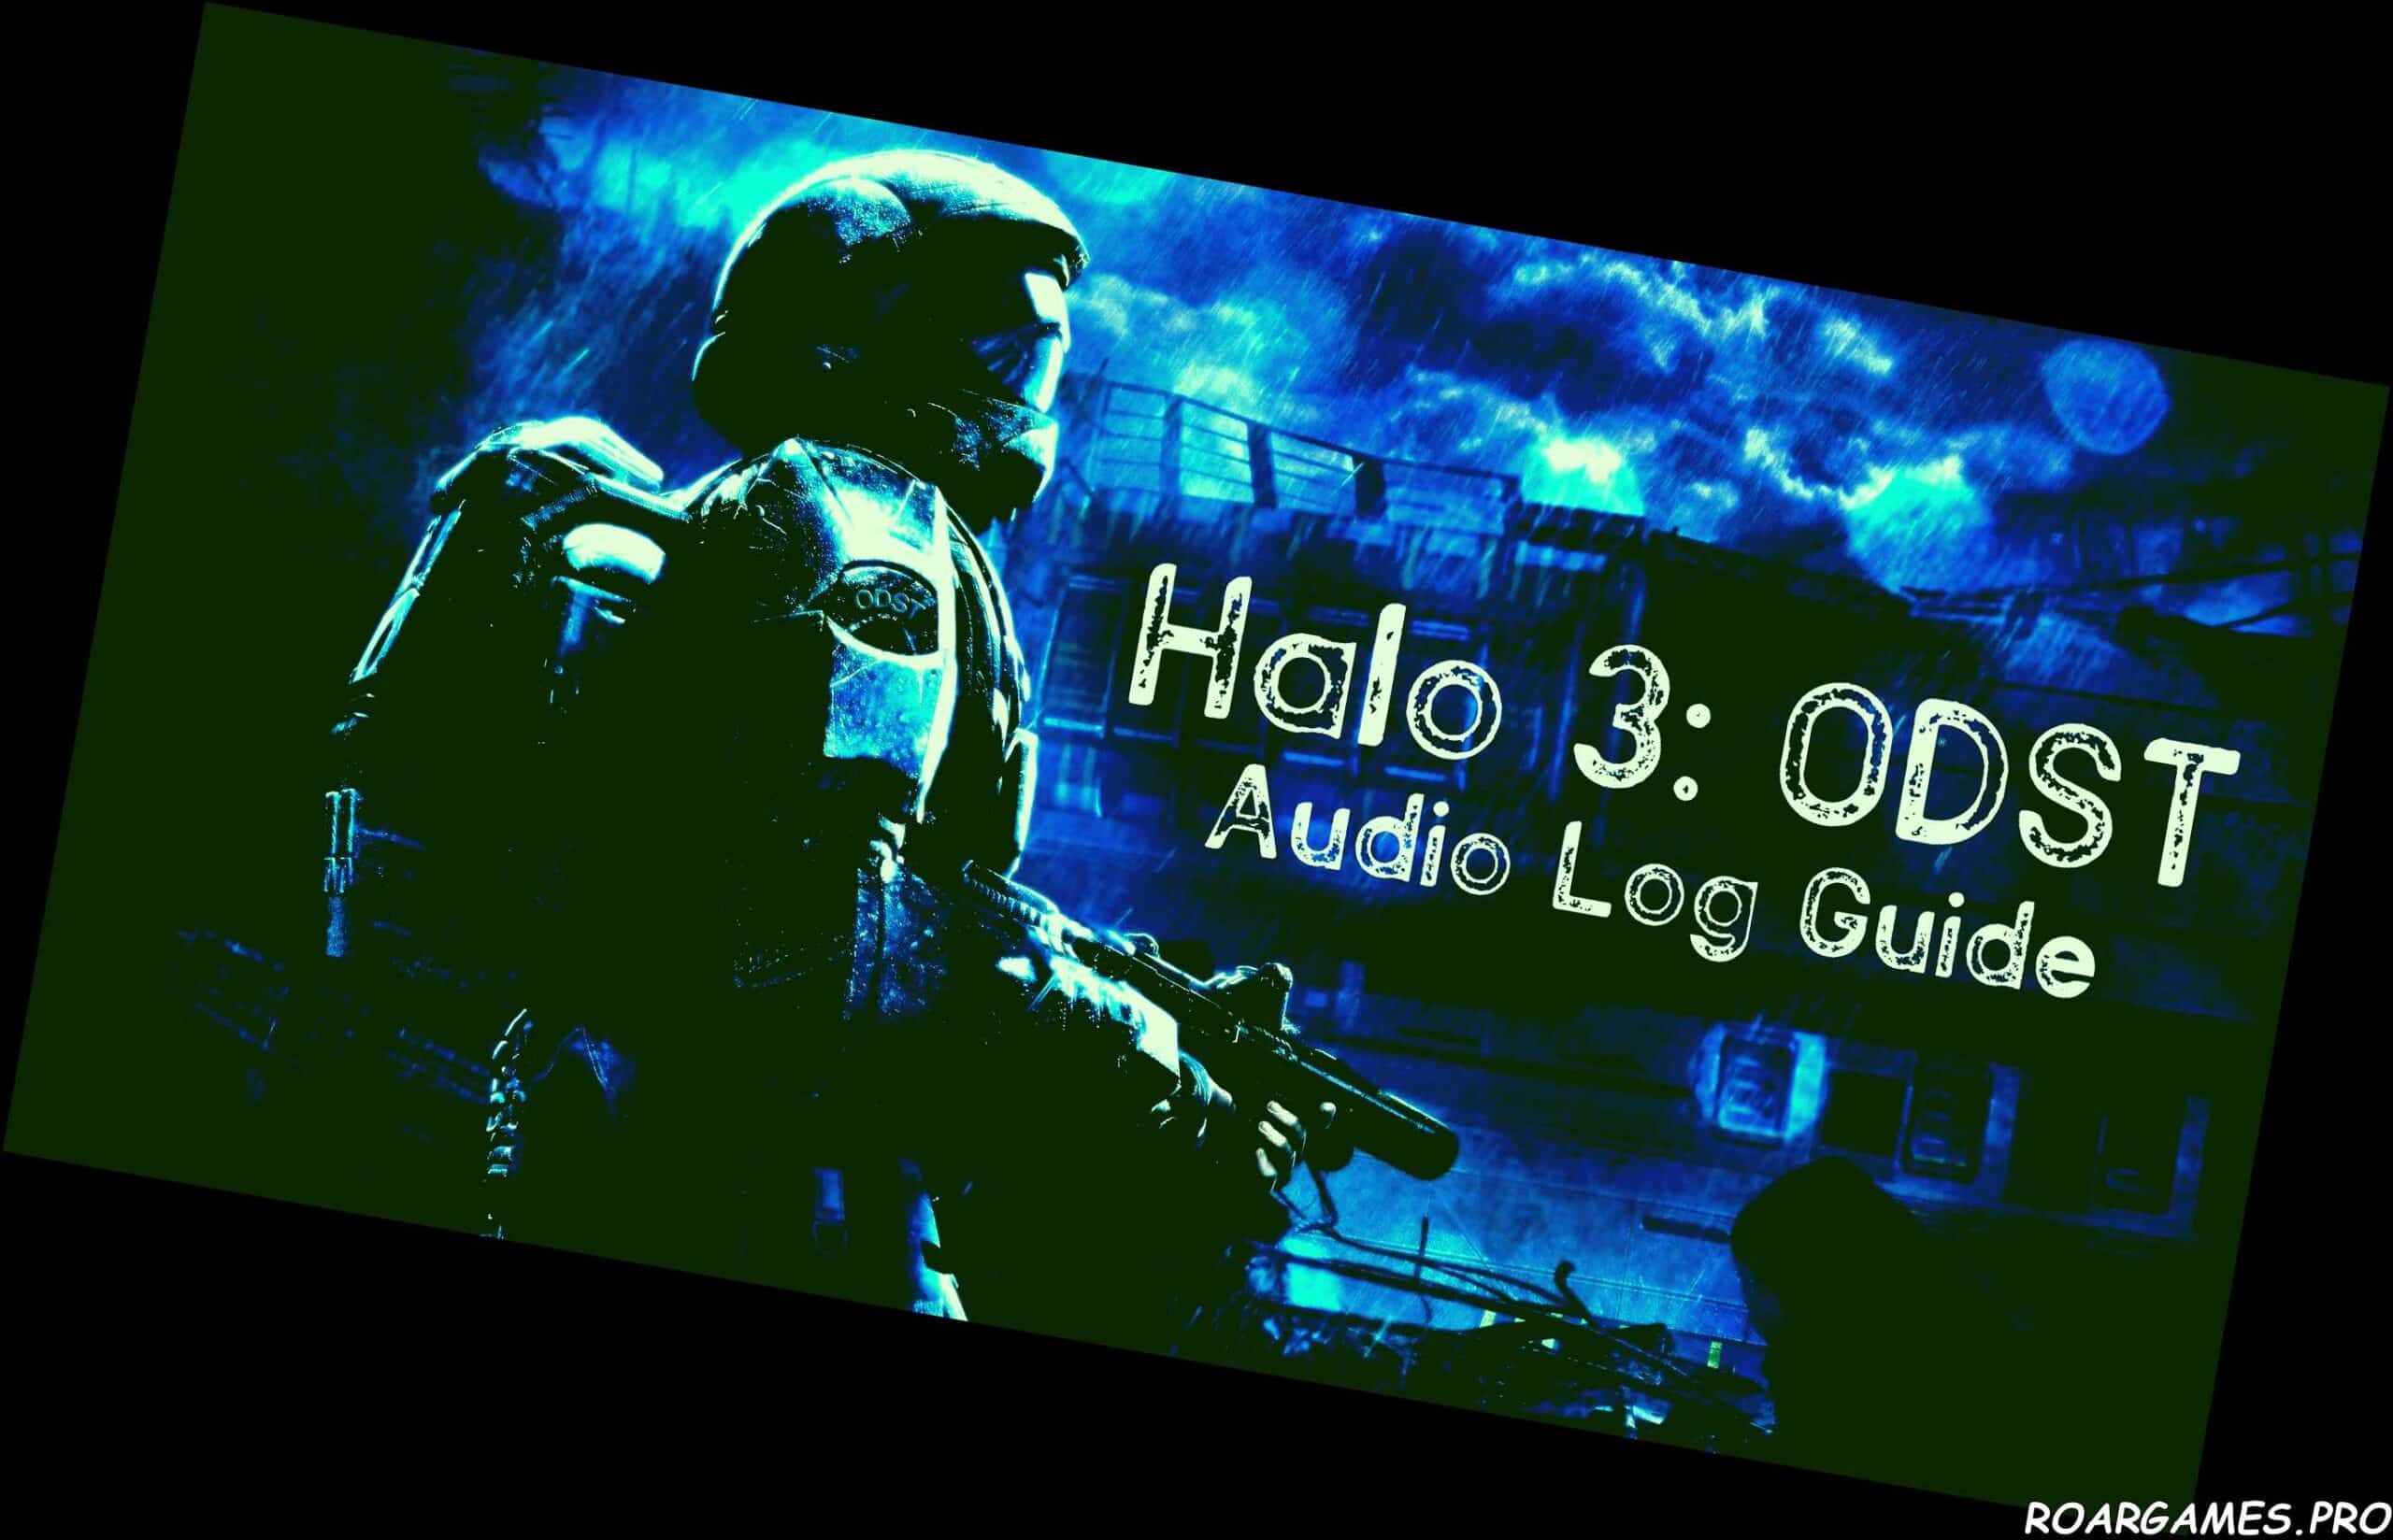 Halo 3 ODST Audio Log Guide scaled